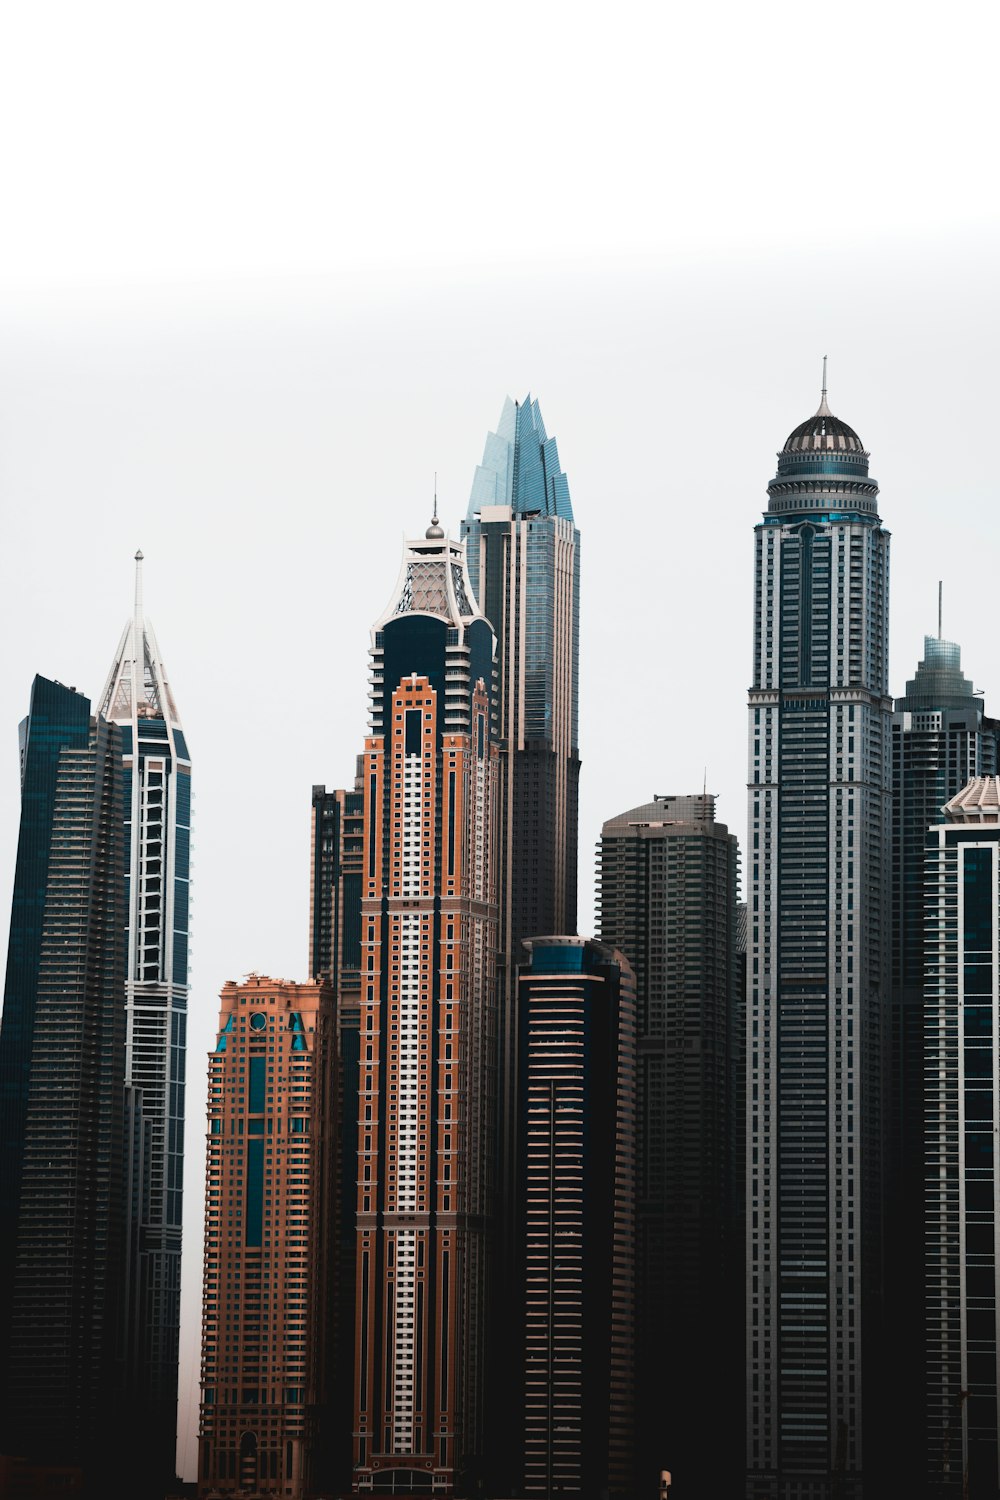 27+ Buildings Pictures | Download Free Images on Unsplash